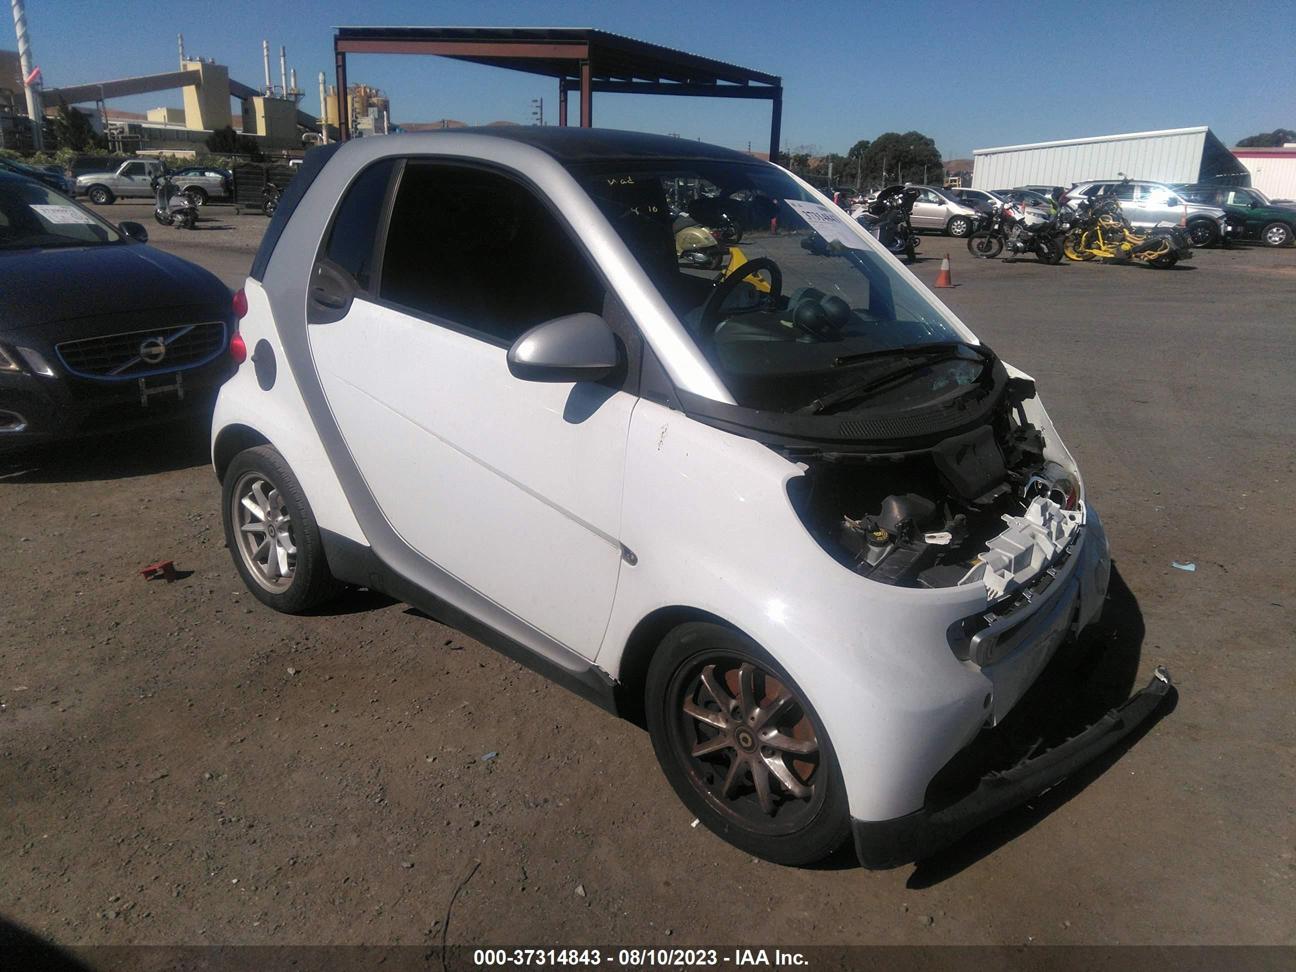 vin: WMEEJ31X08K096472 WMEEJ31X08K096472 2008 smart fortwo 1000 for Sale in 94565, 2780 Willow Pass Road, Bay Point, USA